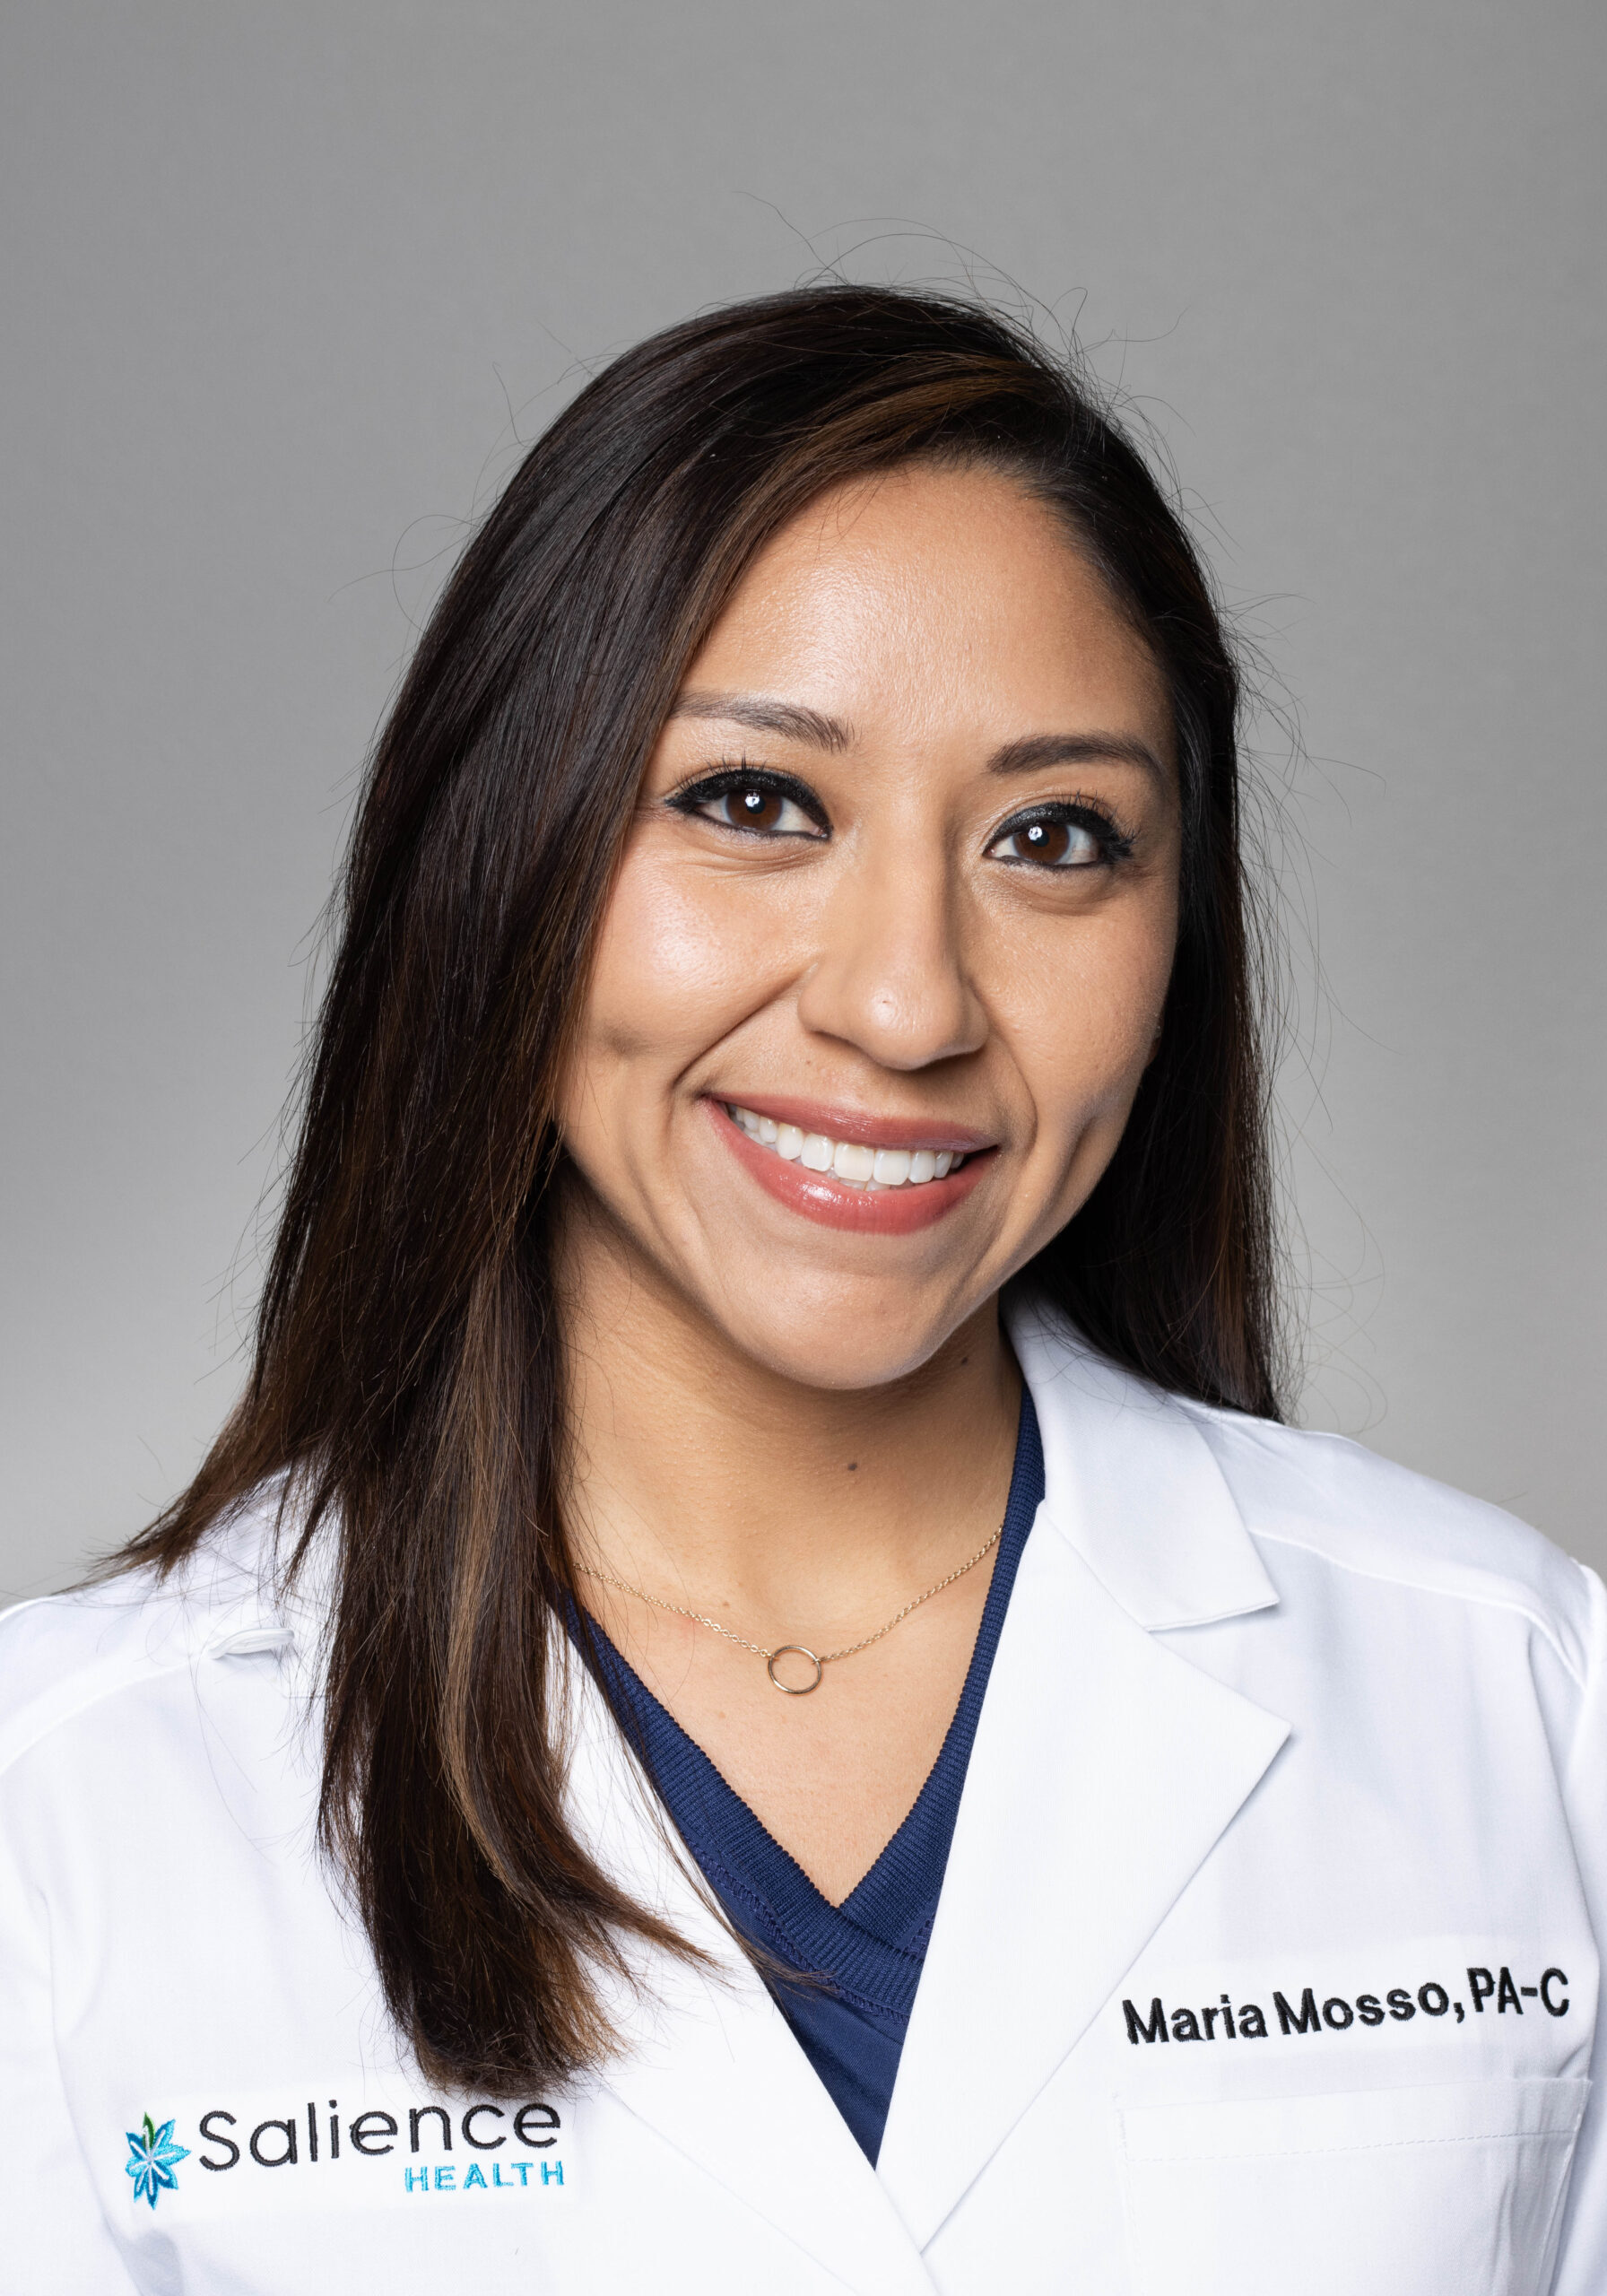 Maria Mosso Certified Physician Assistant at Salience Health - Plano, TX